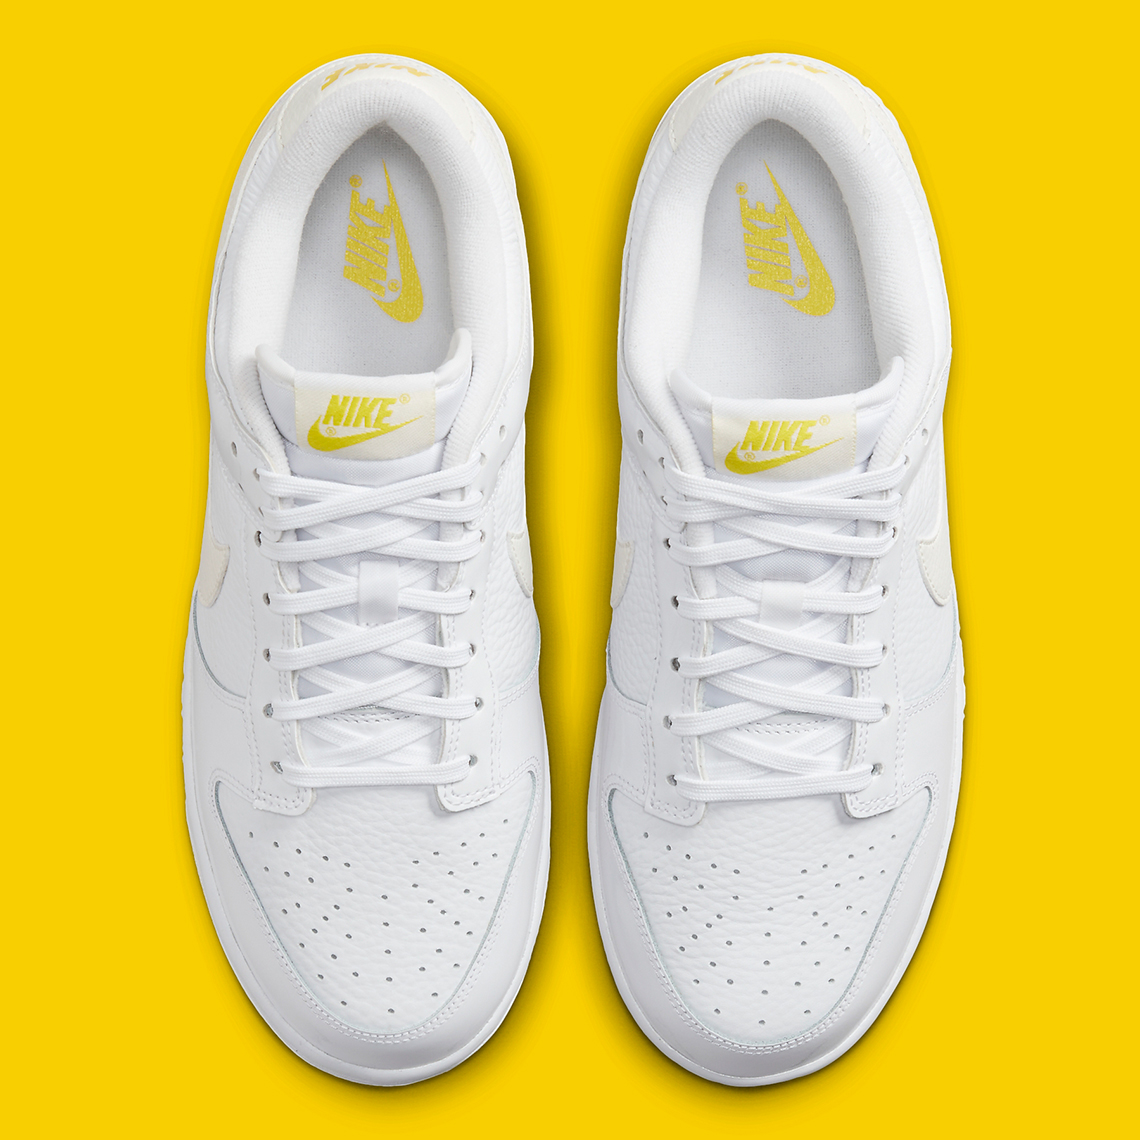 Drakes long-awaited Nike Air Force 1 sneaker collaboration may finally be hitting retail soon White Yellow Heart Fd0803 100 5